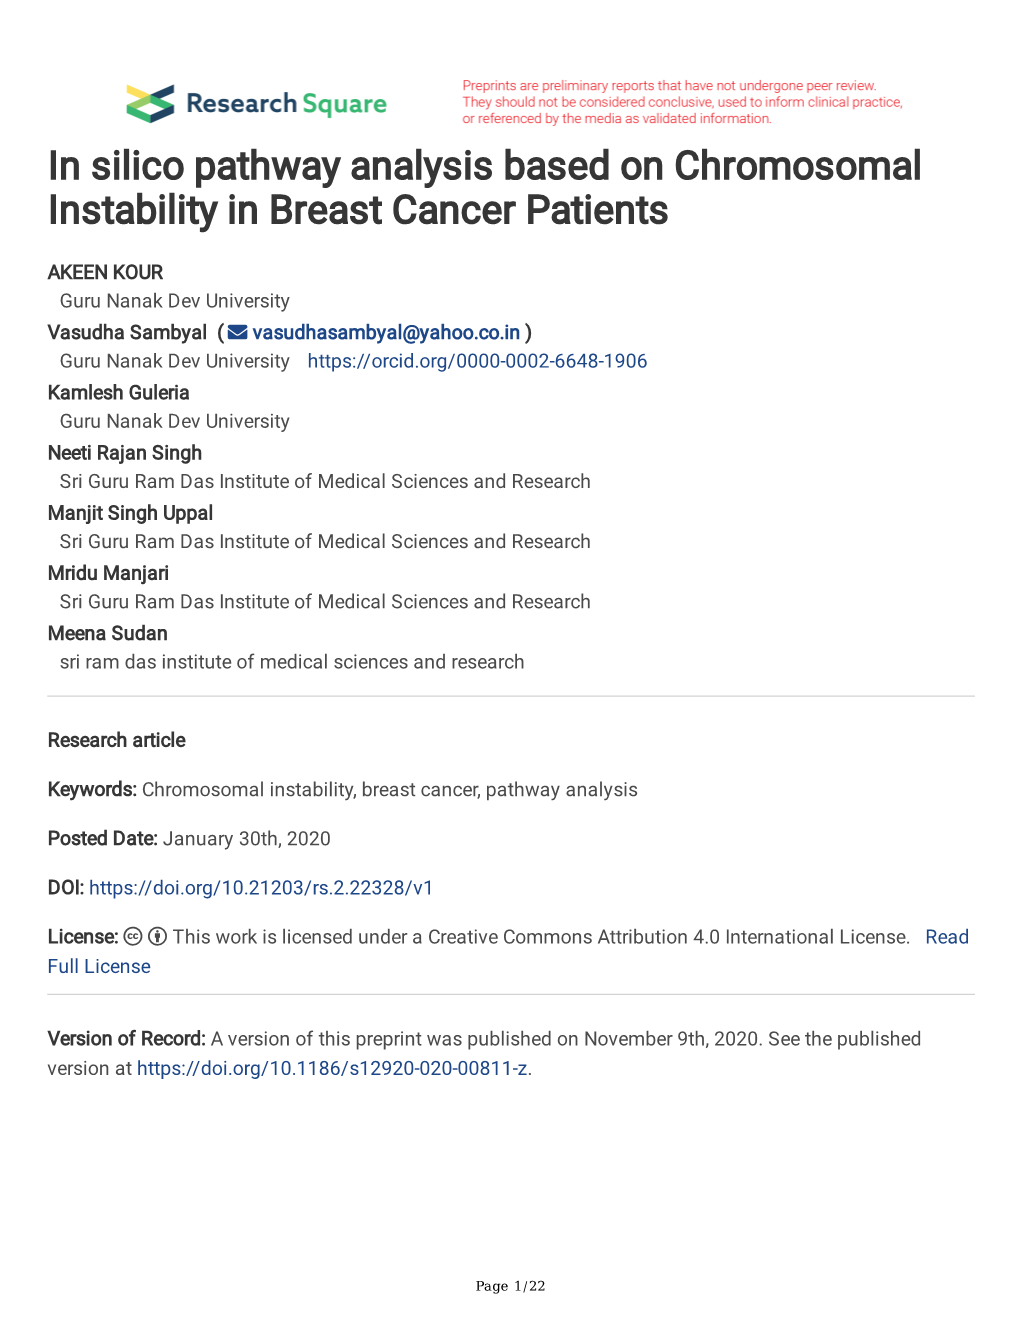 In Silico Pathway Analysis Based on Chromosomal Instability in Breast Cancer Patients